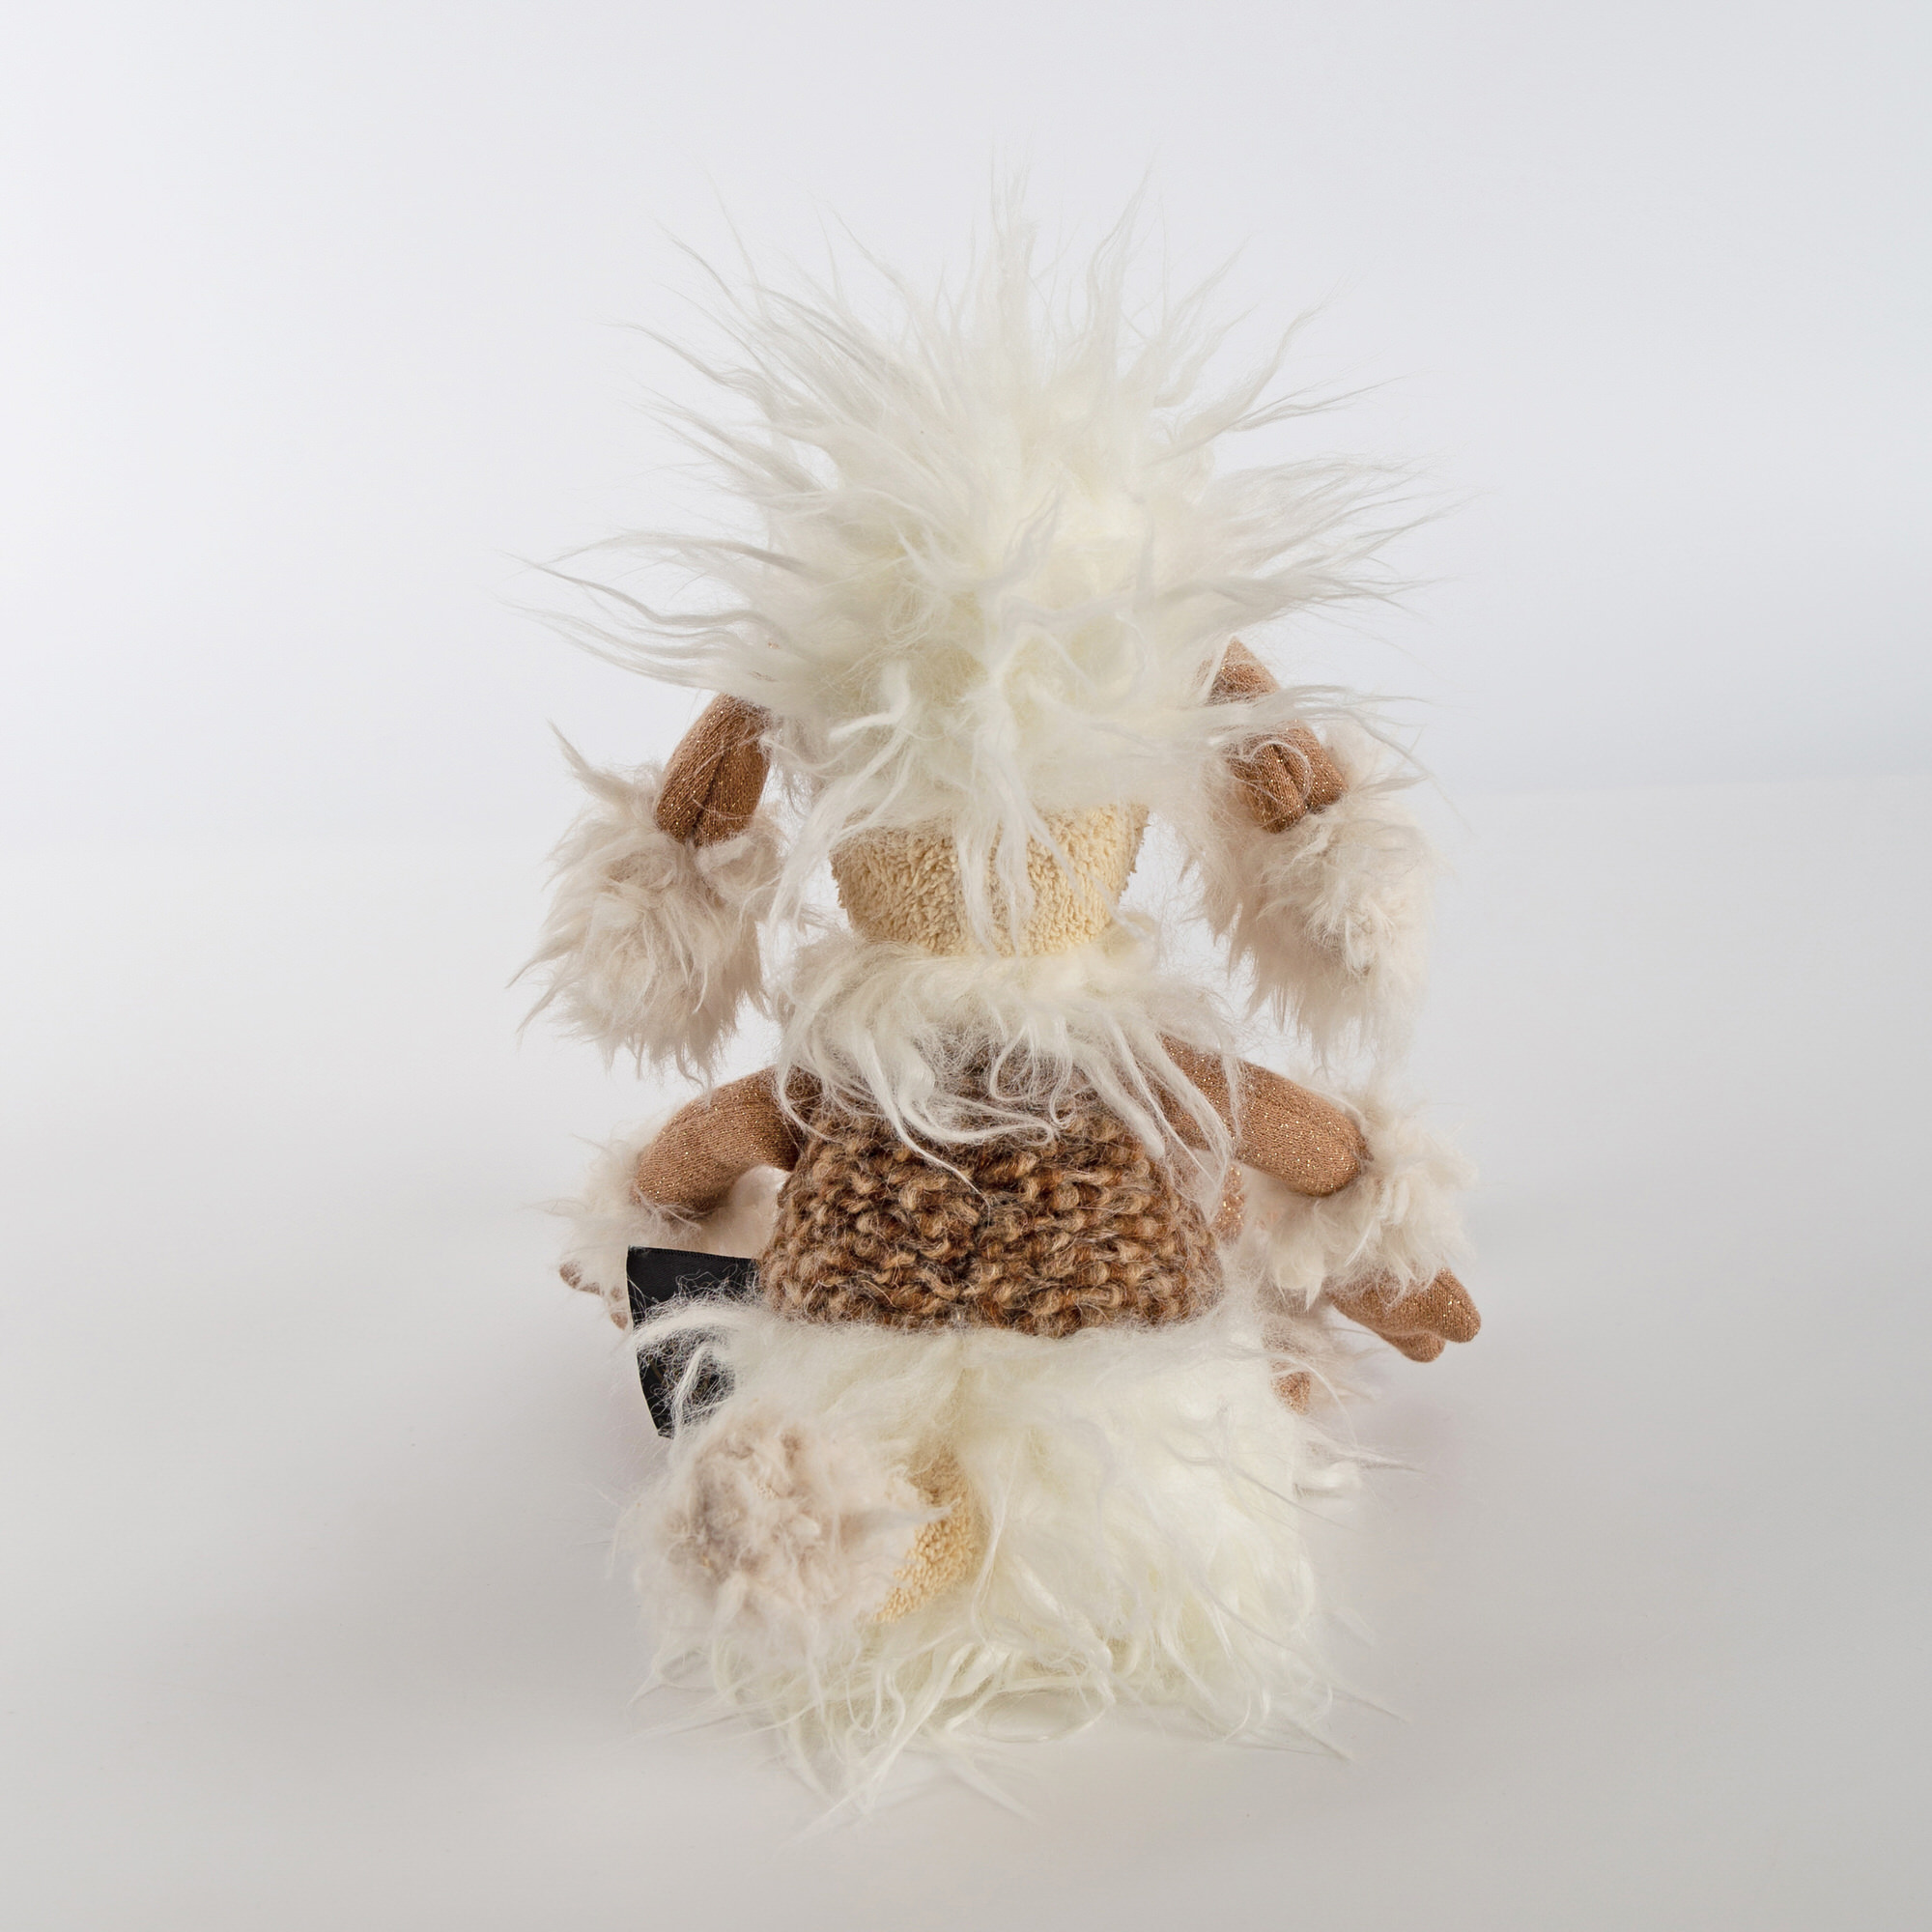 Plush poodle "Day Dreamer", Beasts